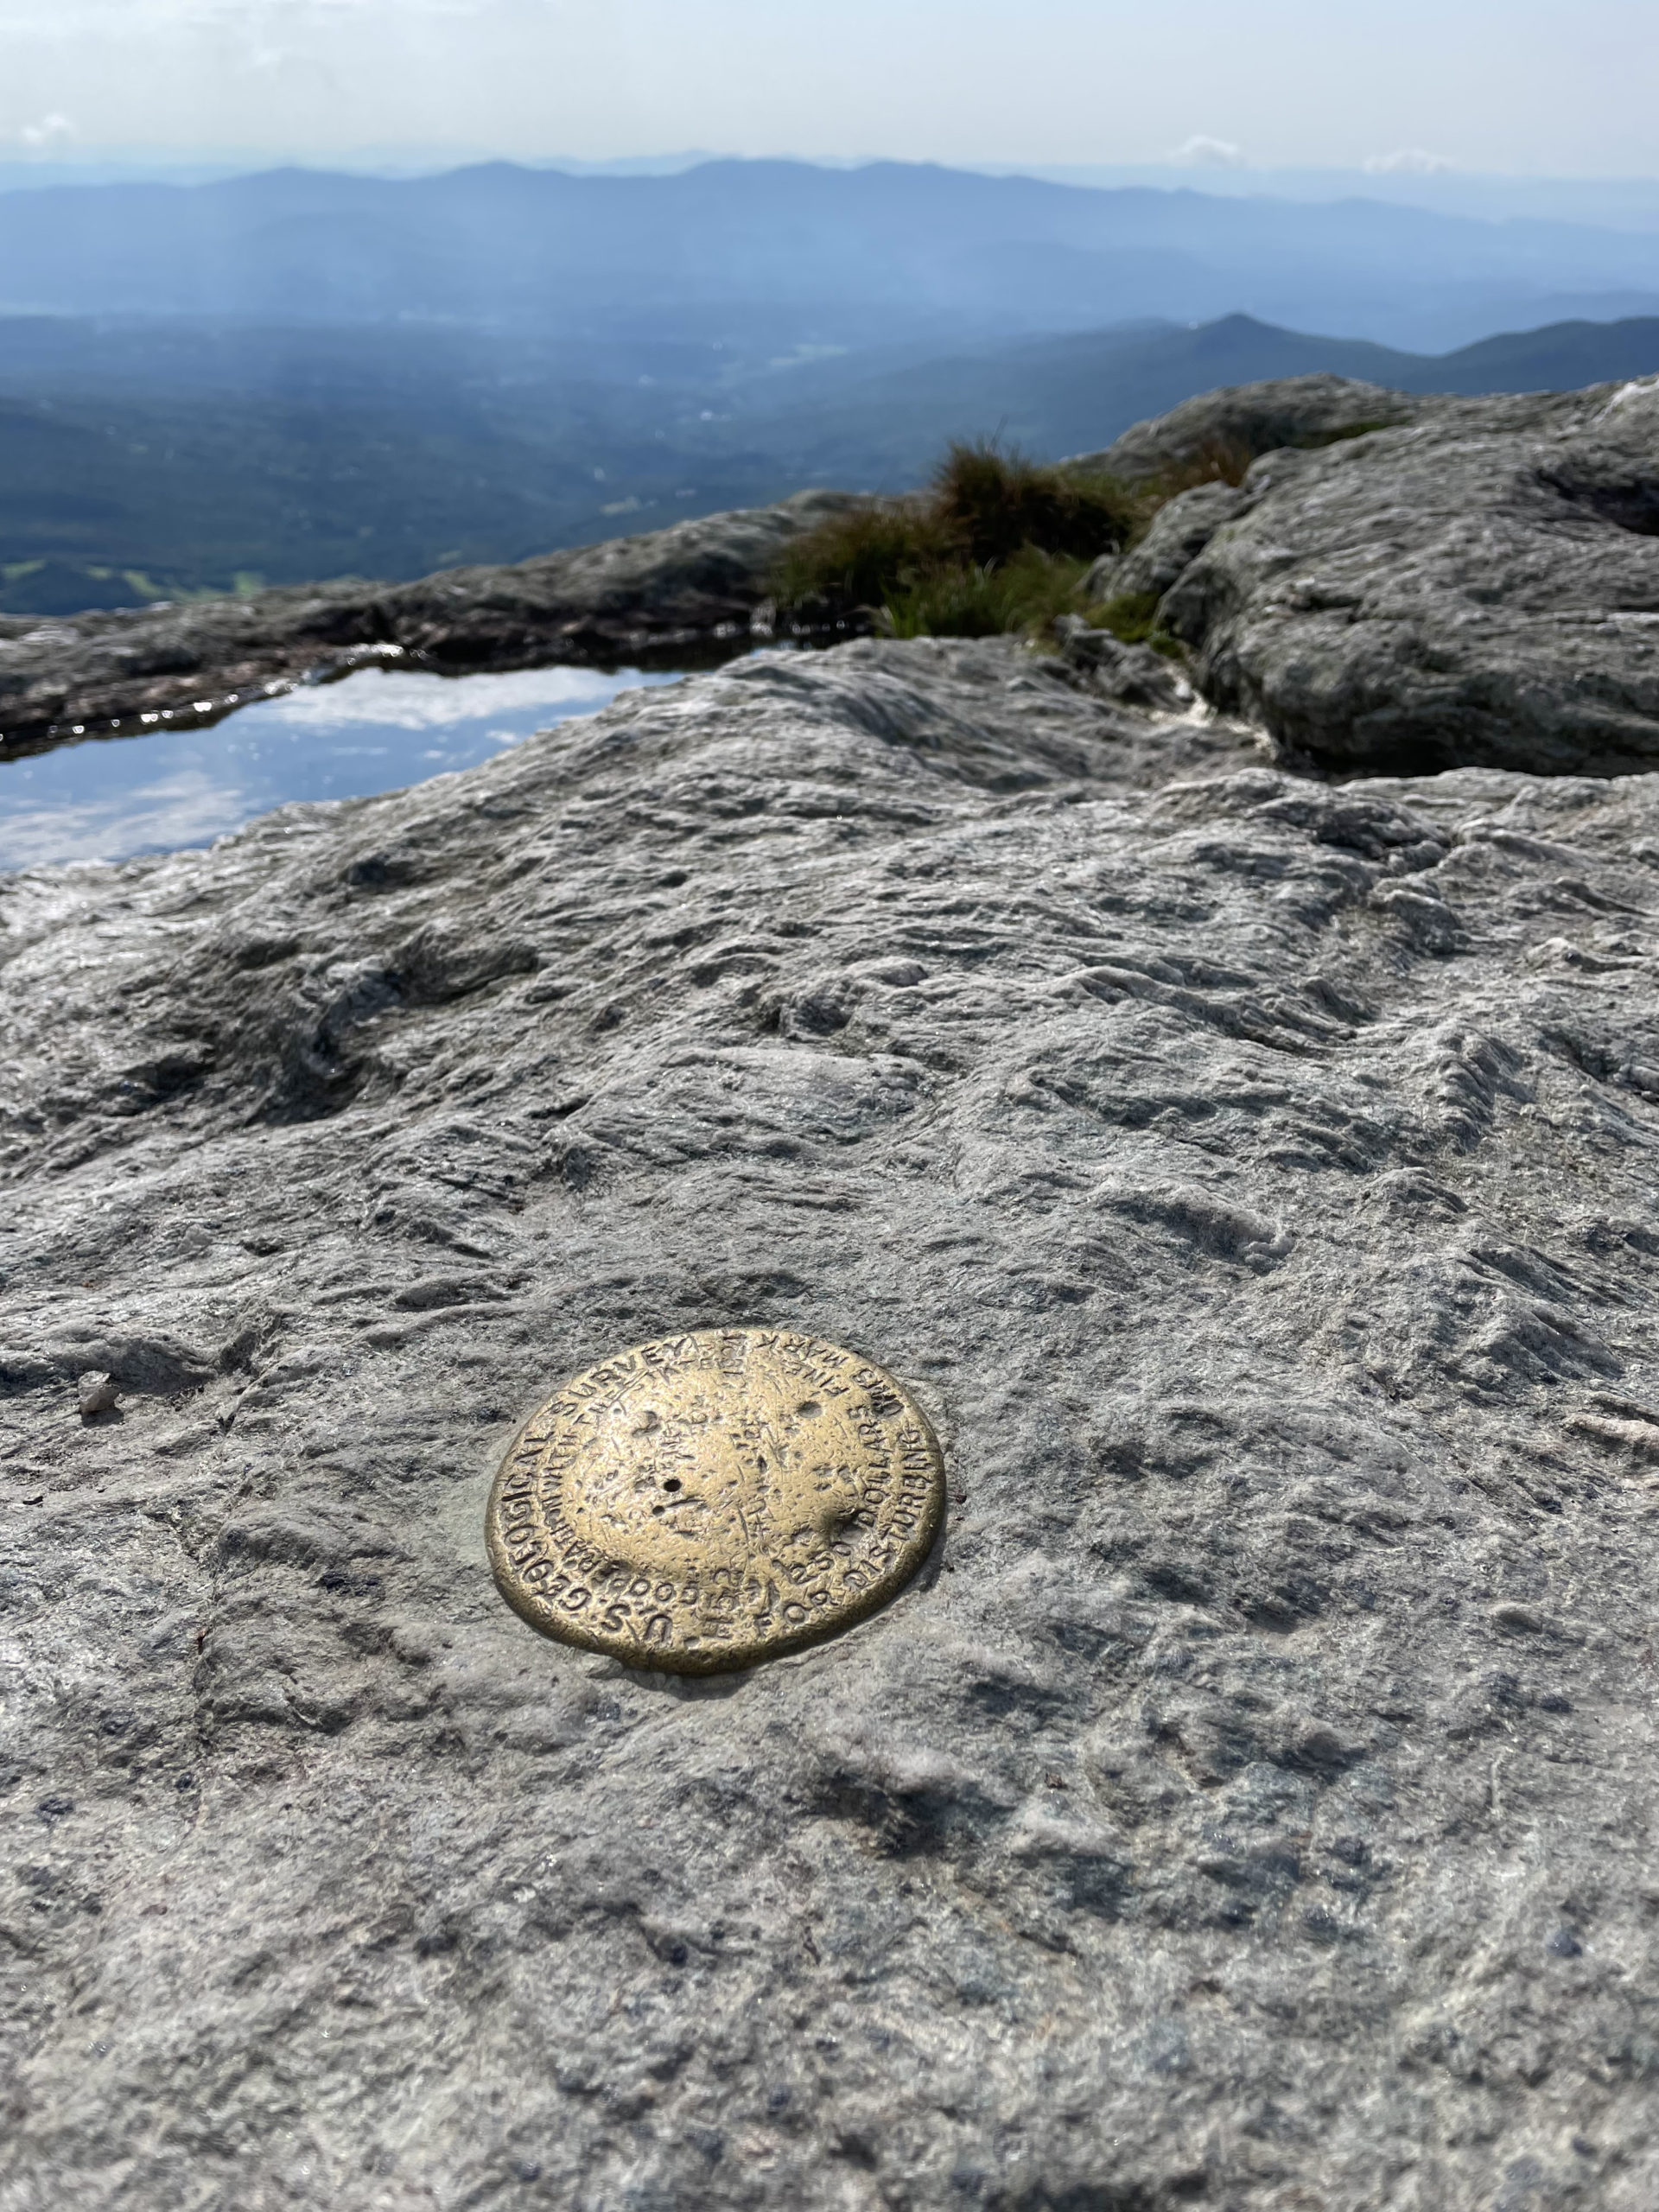 Summit geological marker, seen while hiking Mt. Mansfield in the Green Mountains, Vermont